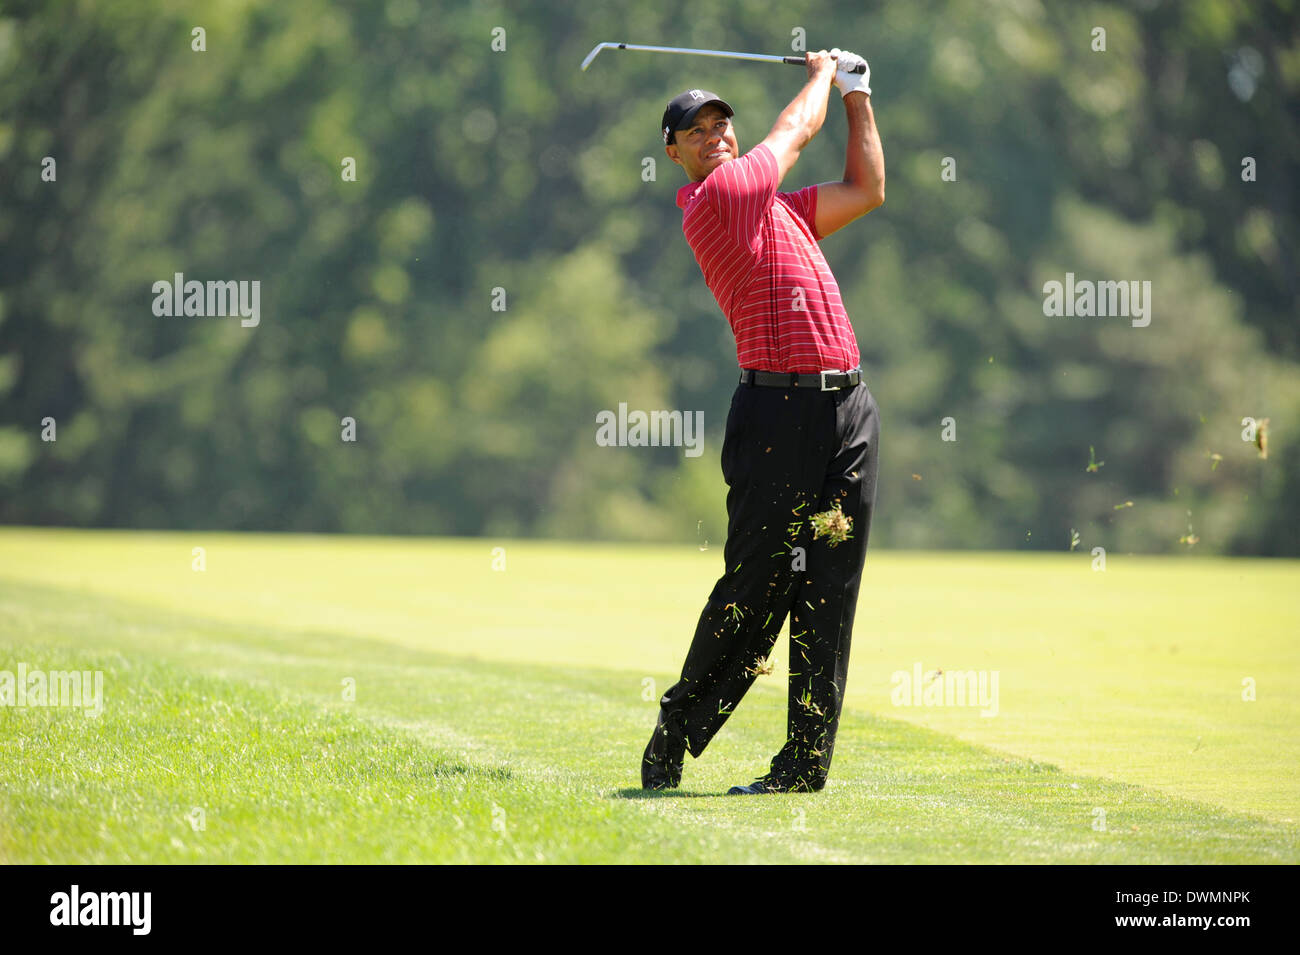 Tiger Woods competes during PGA tour at Aronimink Golf Club in Newtown Square, PA, USA. Stock Photo